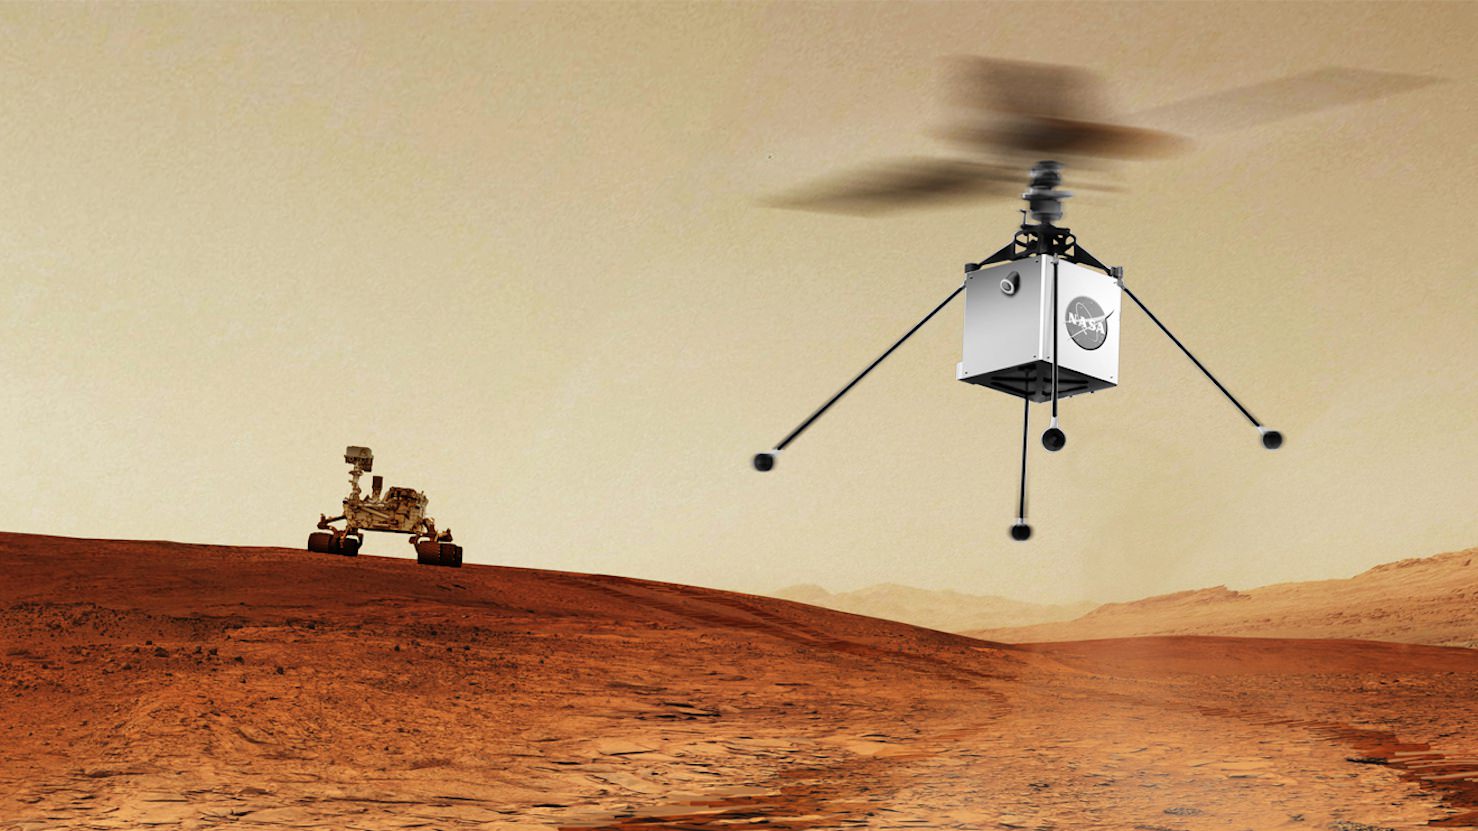 NASA is sending an autonomous helicopter drone to Mars as part of their next rover mission in 2020